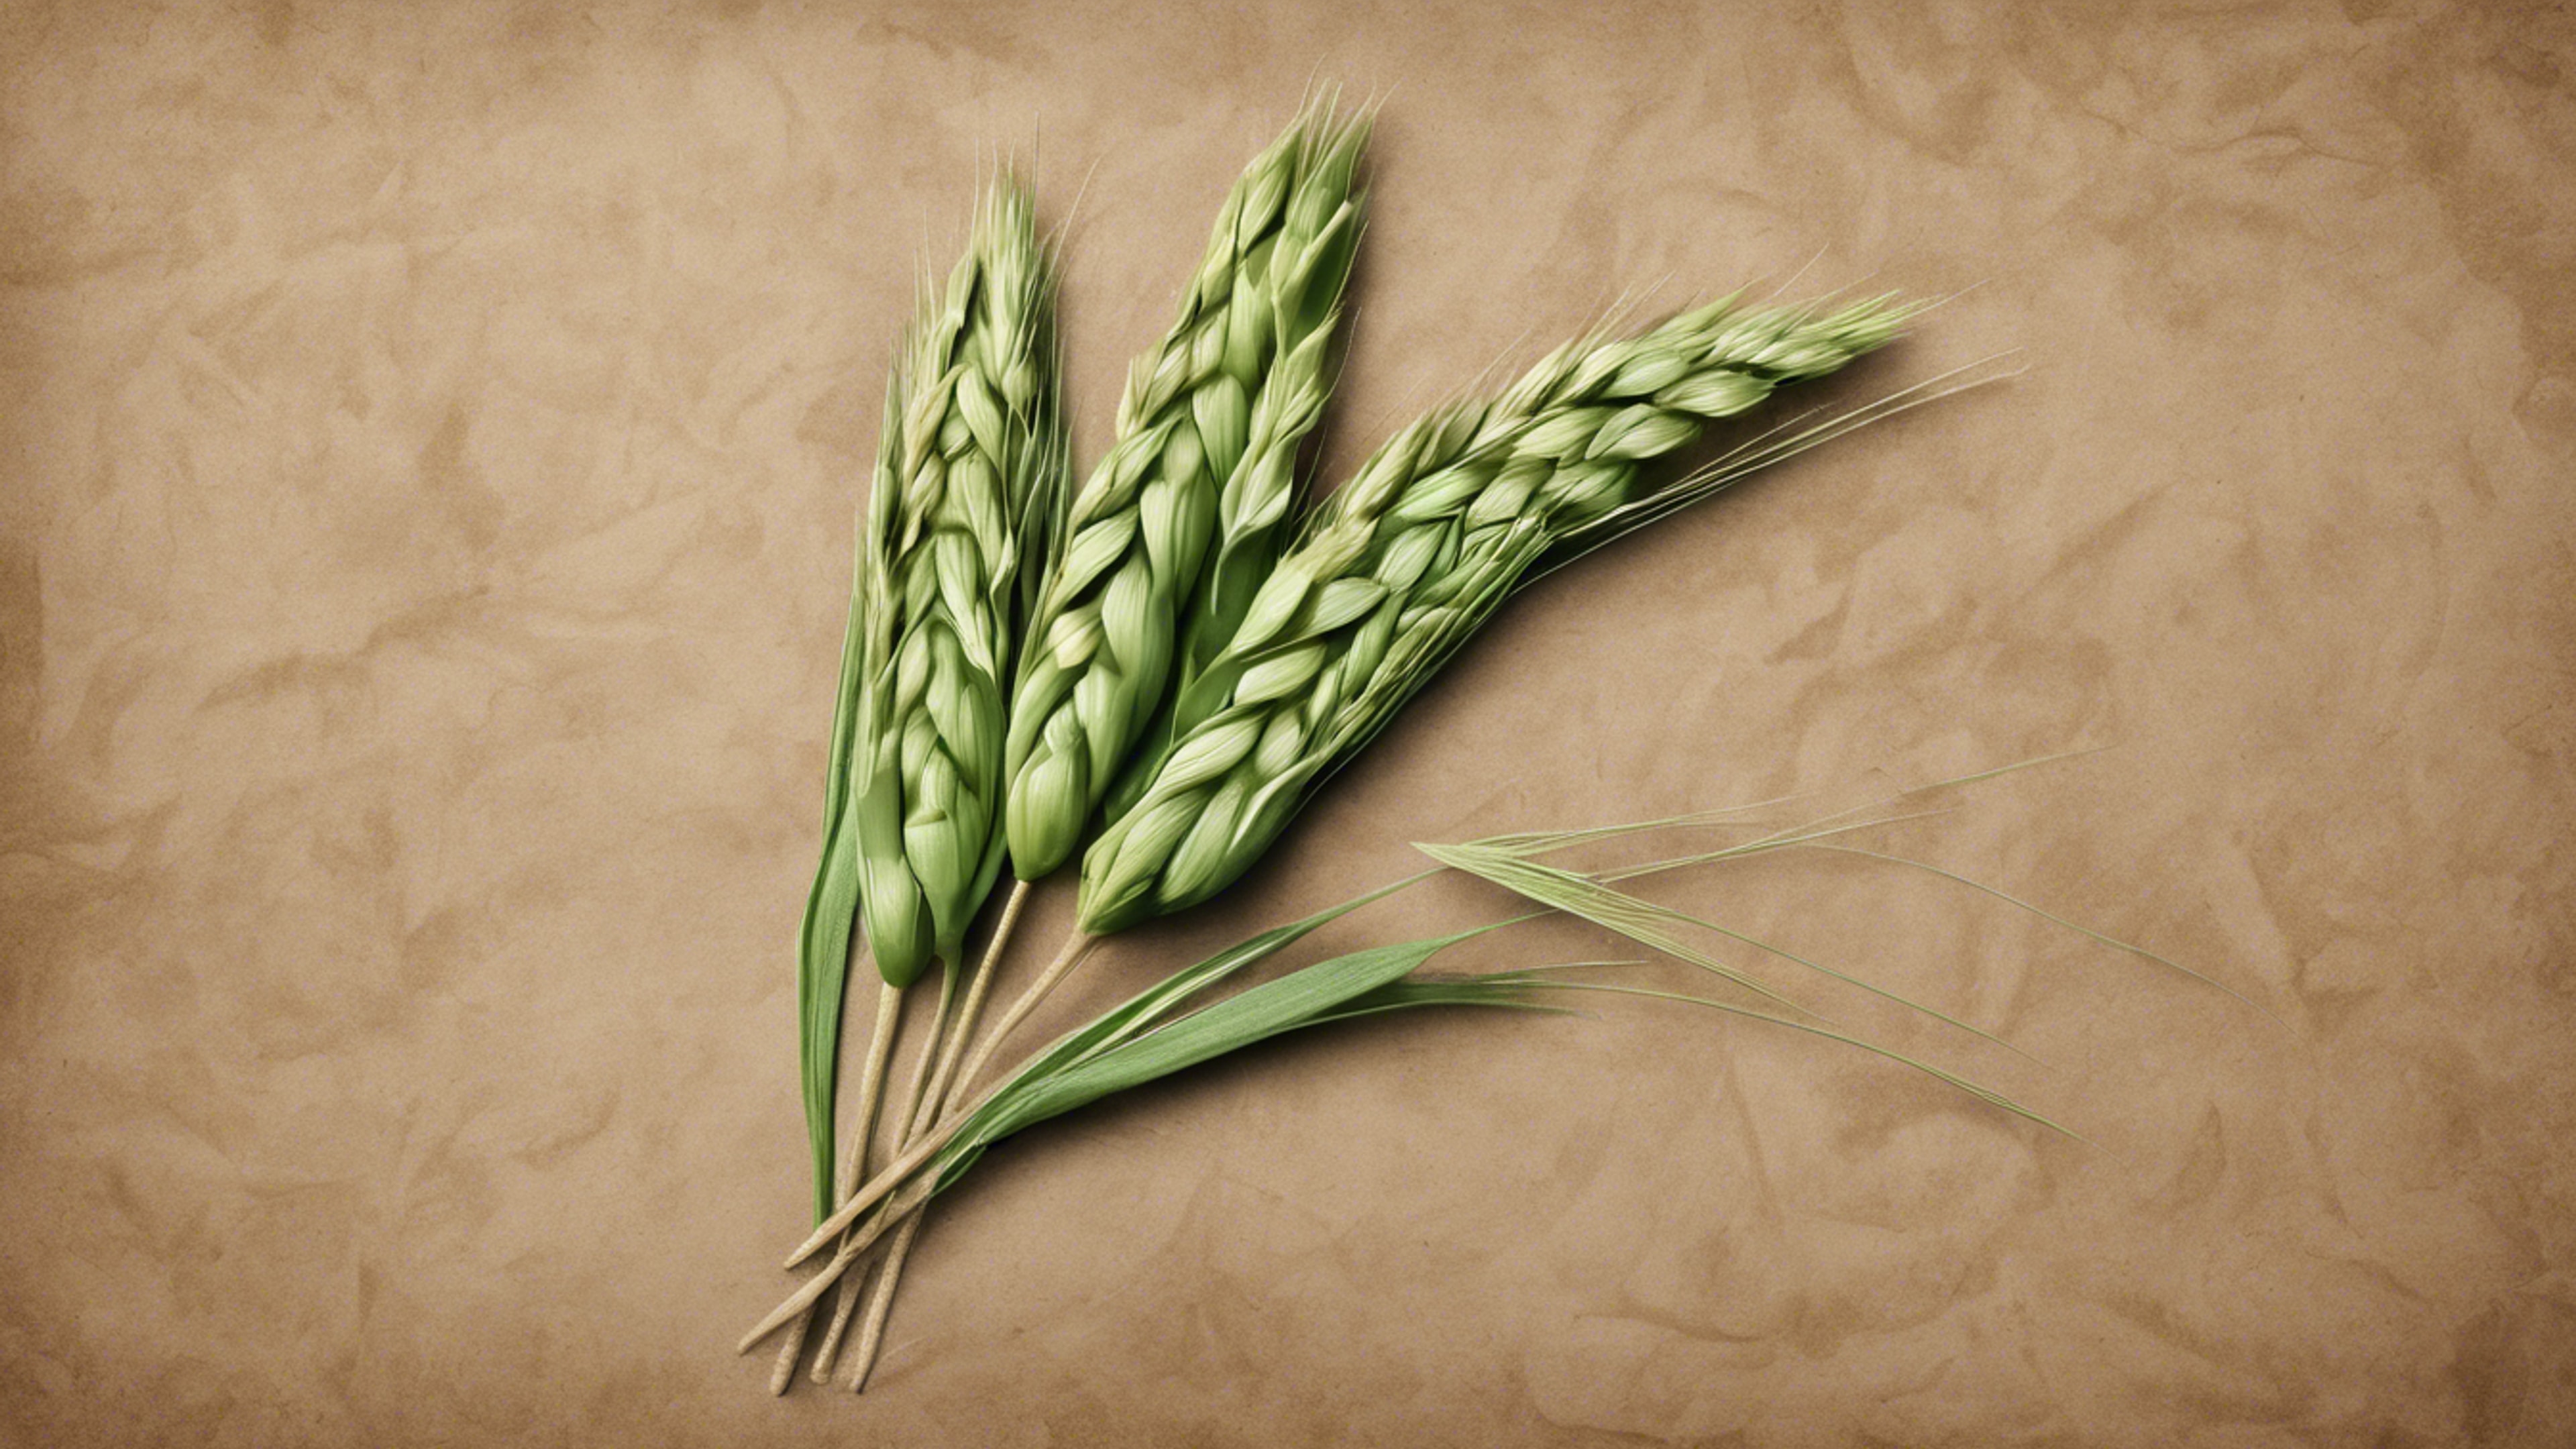 A detailed botanical illustration of a stalk of green wheat against an aged brown paper background. טפט[958050ab552342b3bed0]